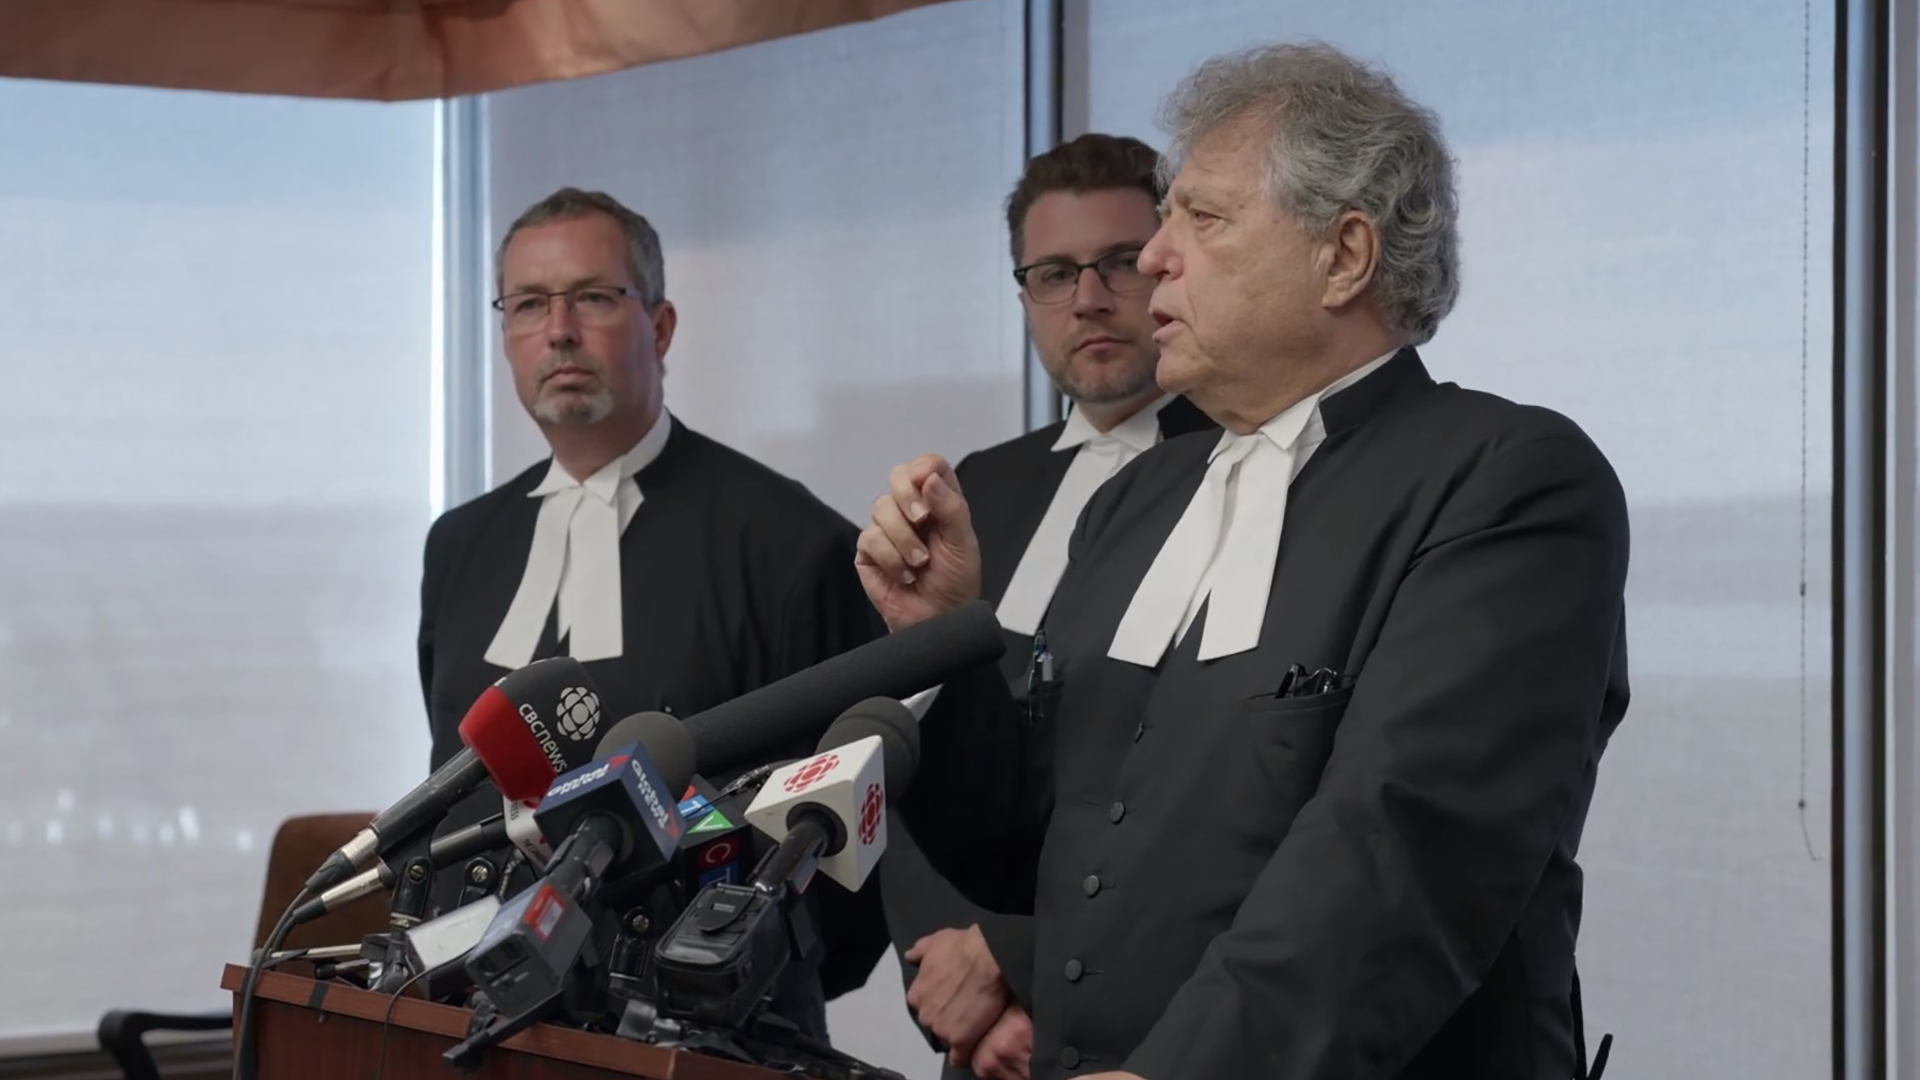 The Suspect Ep. 4, Dennis Oland's retrial begins. When the verdict is finally given, will justice be served?, TV-MA, Season 1029205, Episode 4